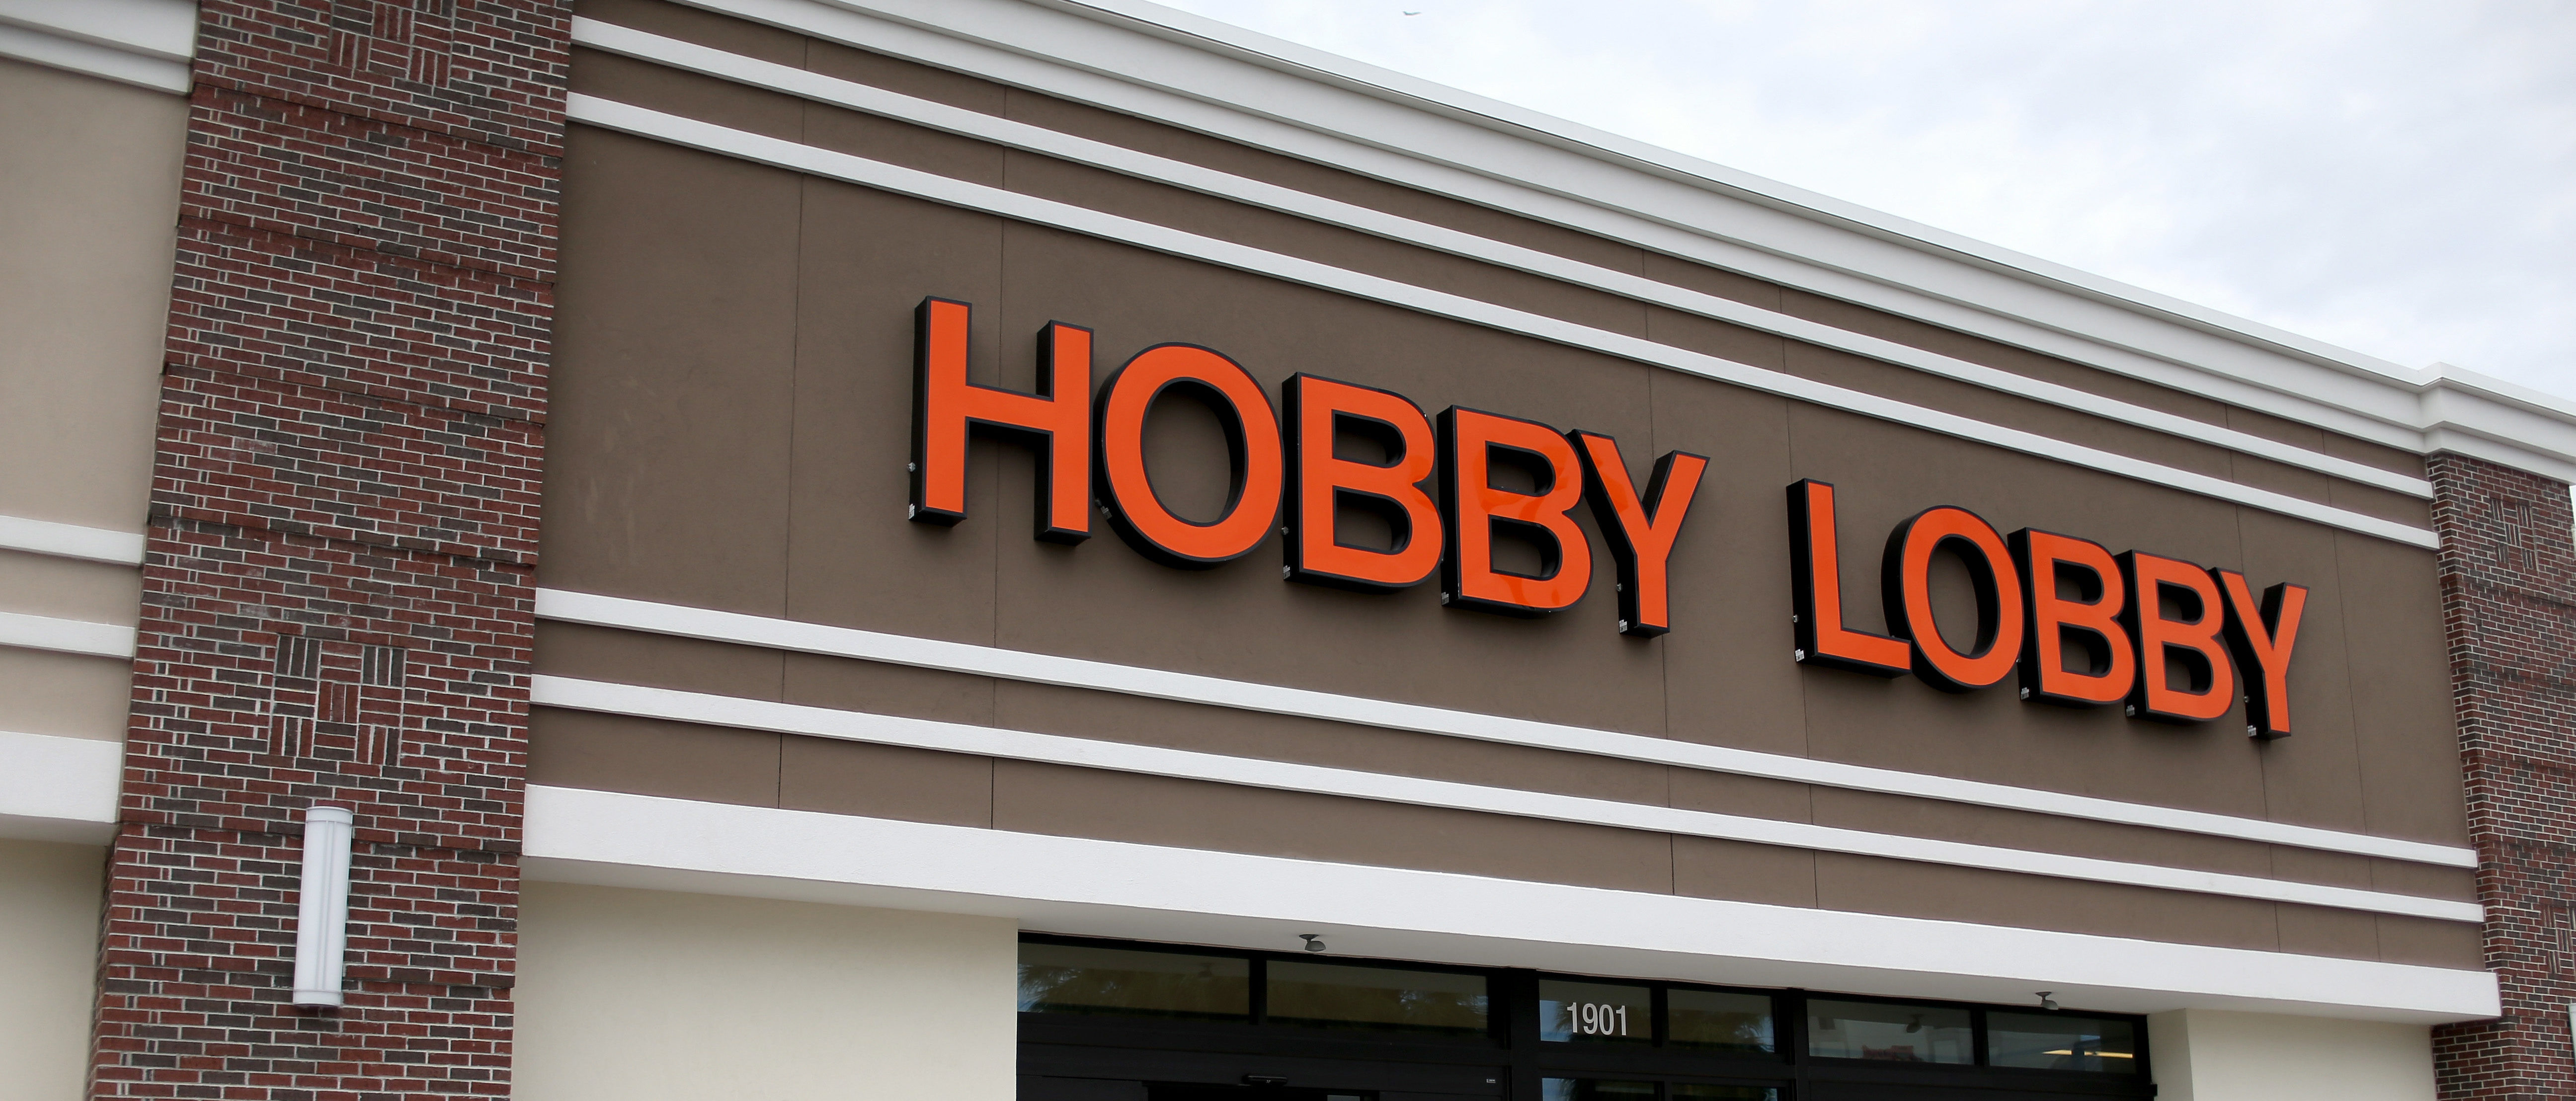 A Hobby Lobby store is seen on June 30, 2014 in Plantation, Florida. (Photo by Joe Raedle/Getty Images)